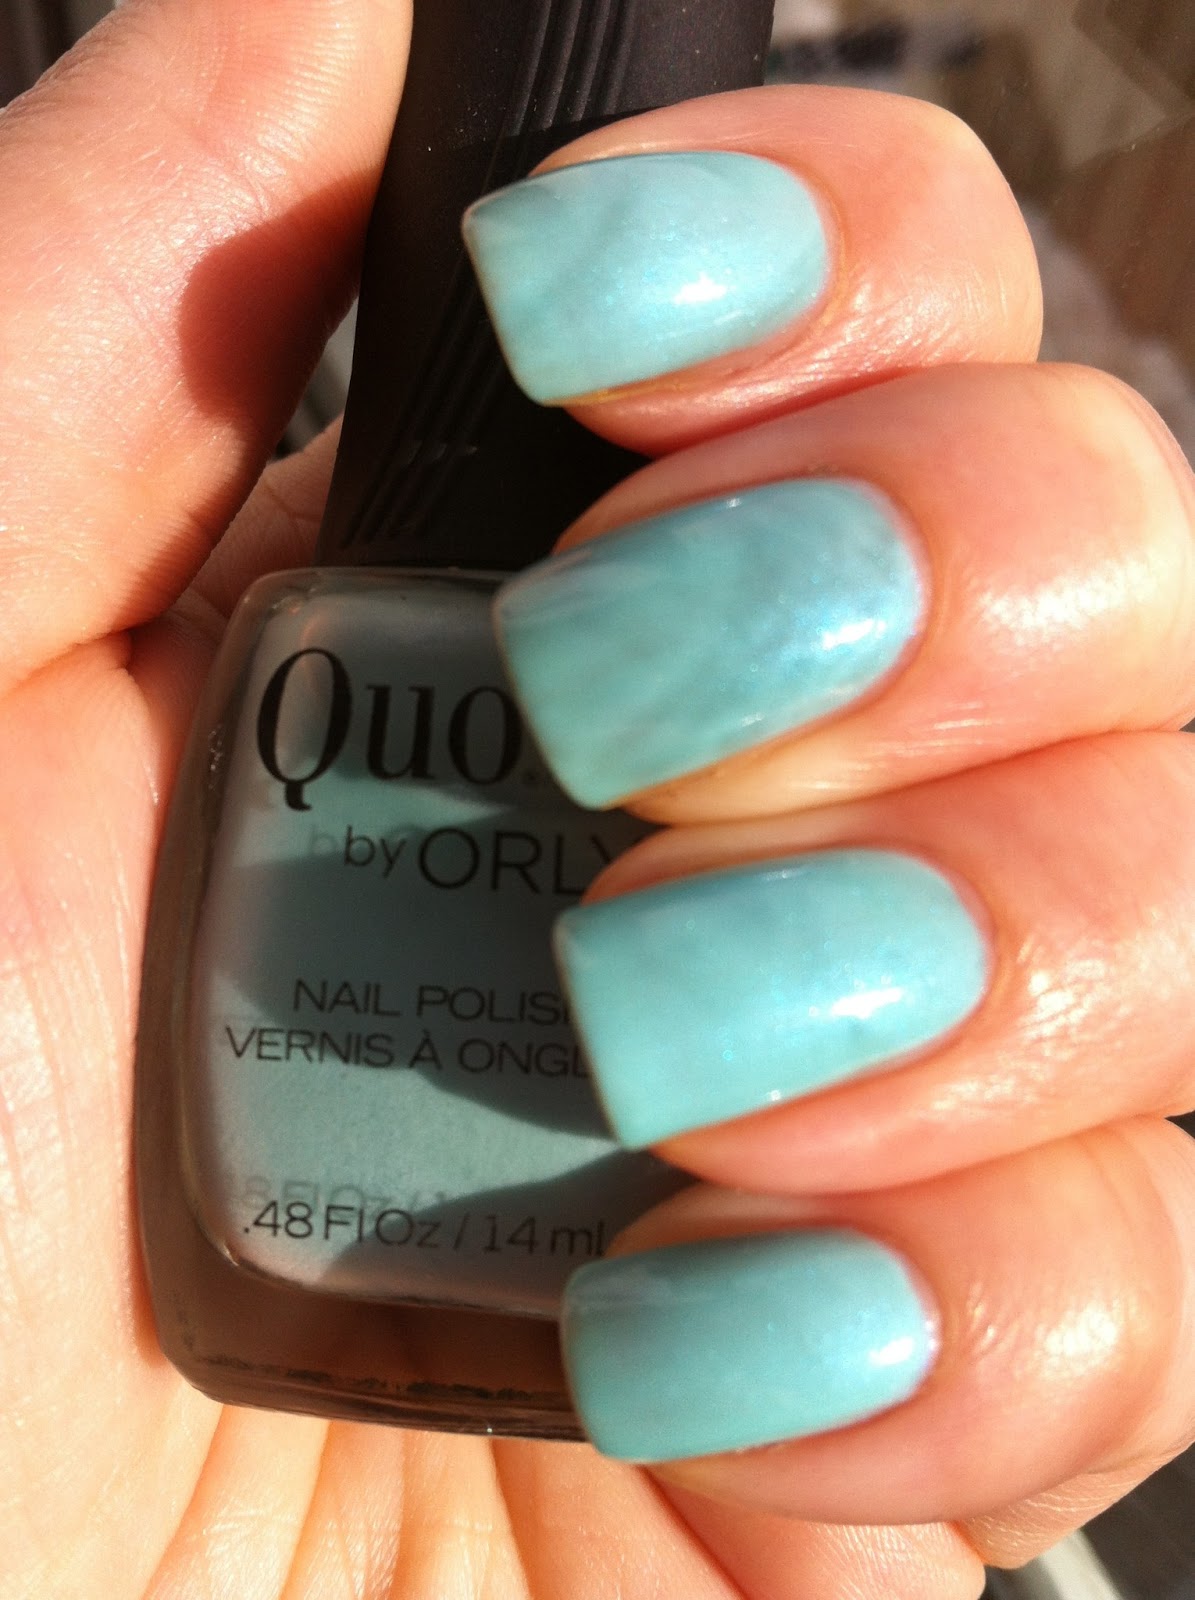 Nail Polish Junkie: Quo by Orly Prepster